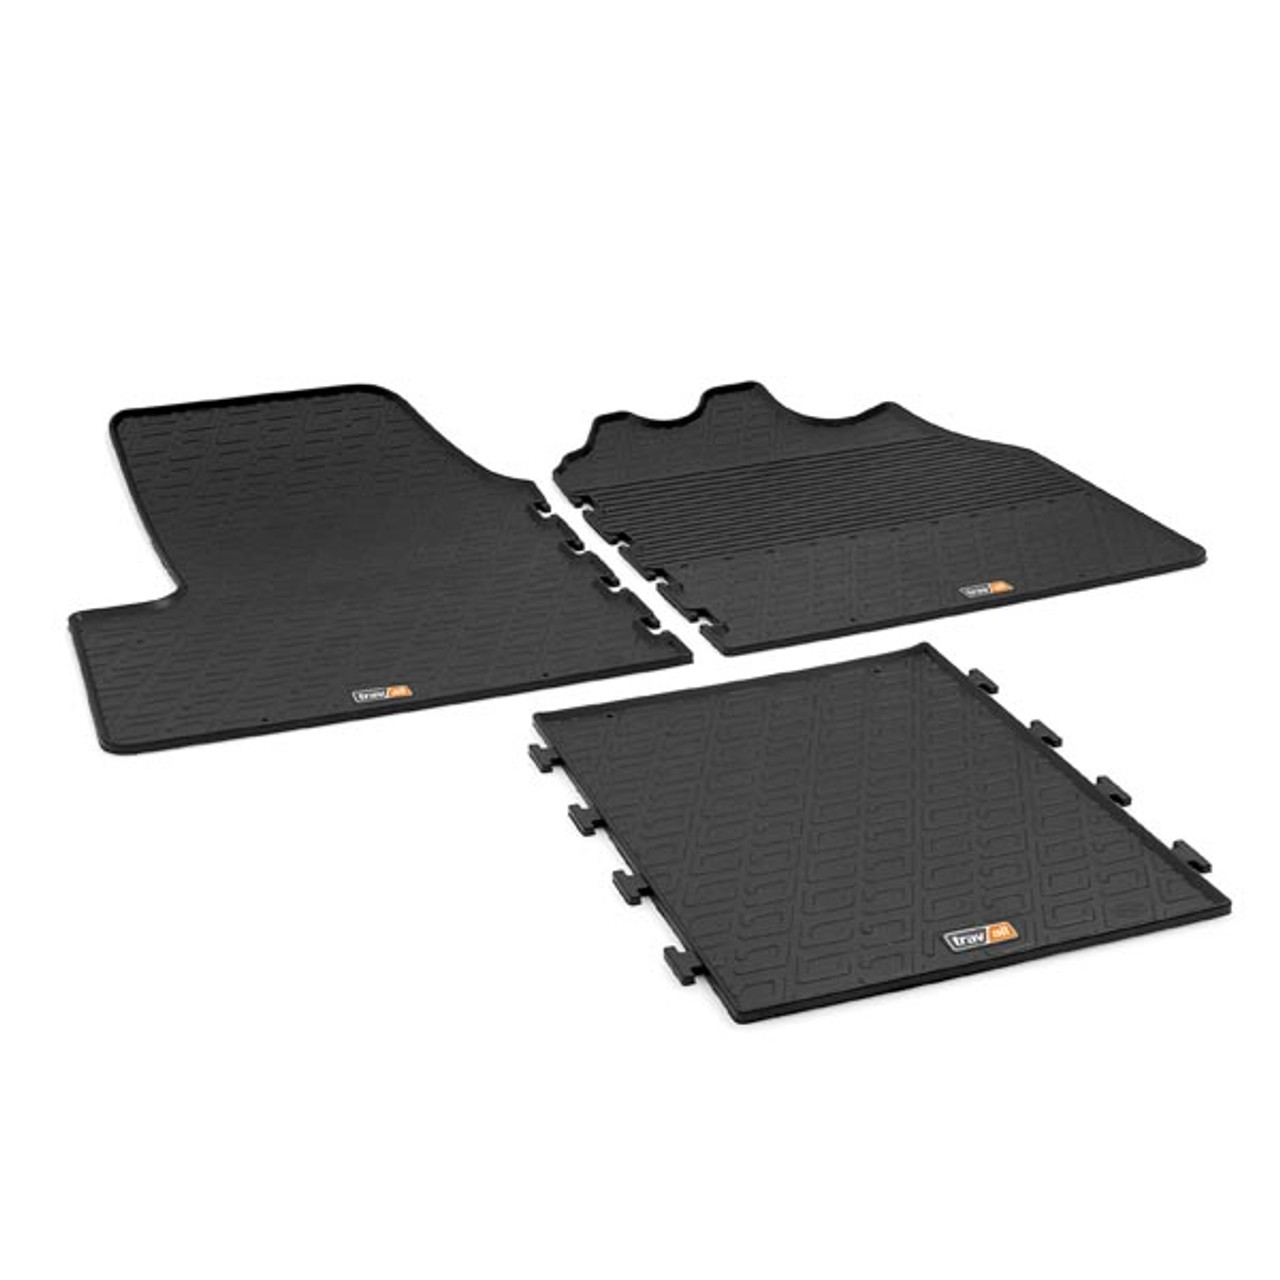 Custom Made Rubber Car Mats for Citroen Relay and Peugeot Boxer 2014 on and Fiat Ducato 2014 to 2016